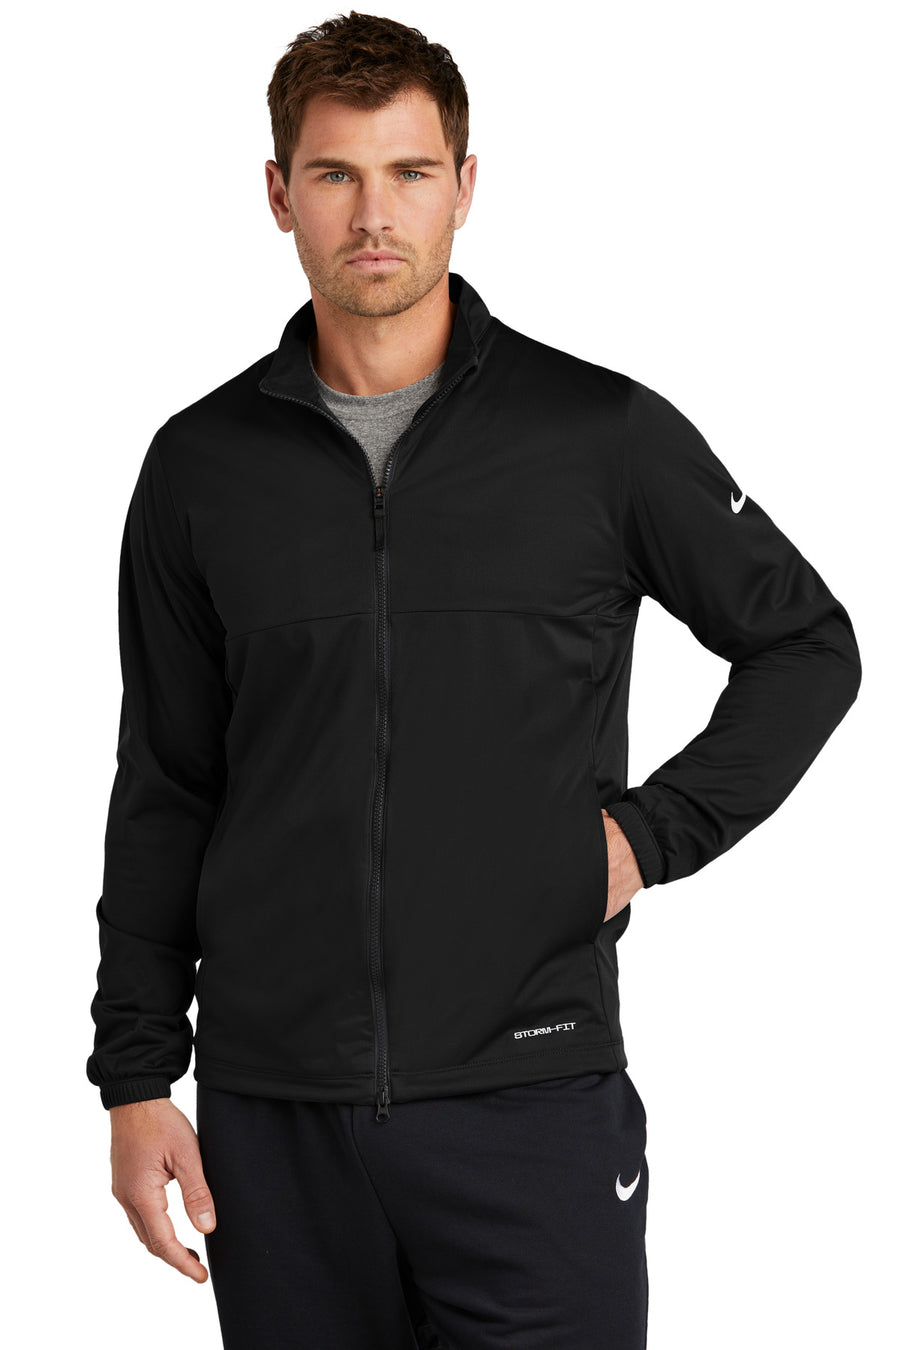 Nike Storm-FIT Full-Zip Jacket NKDX6716 – On Game Day